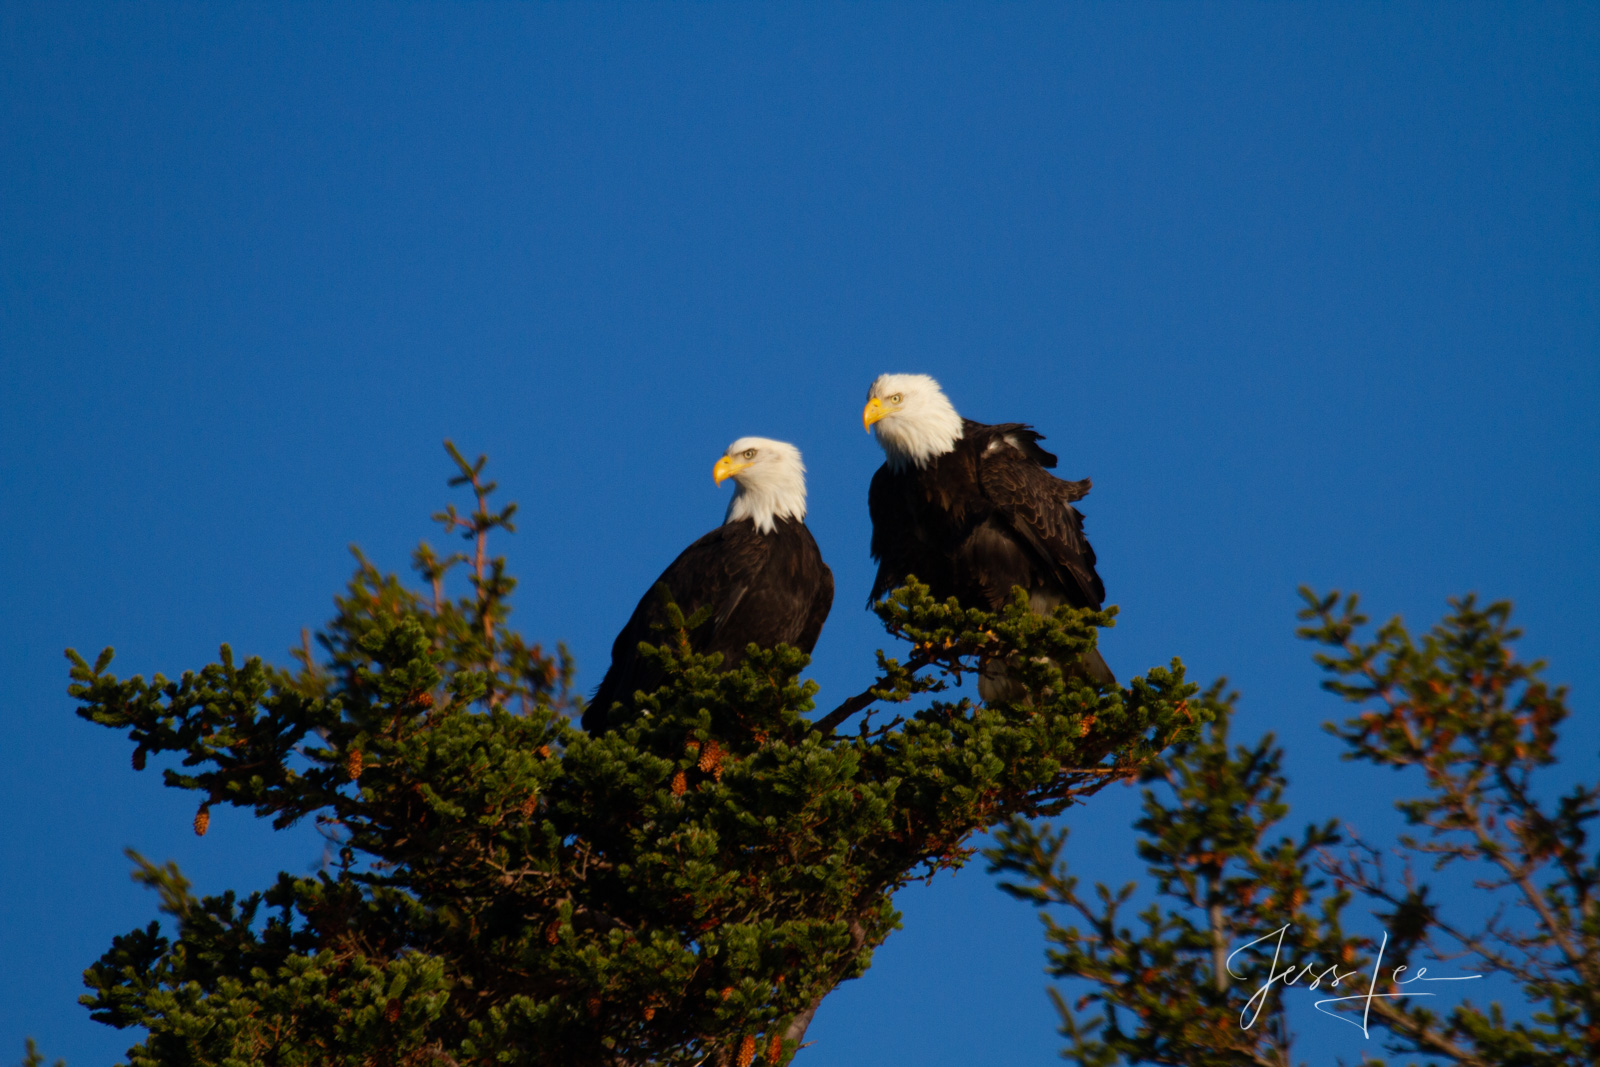 Bring home the power and beauty of the amazing fine art American Bald Eagle photograph Two is a Couple by Jess Lee from his Wildlife...